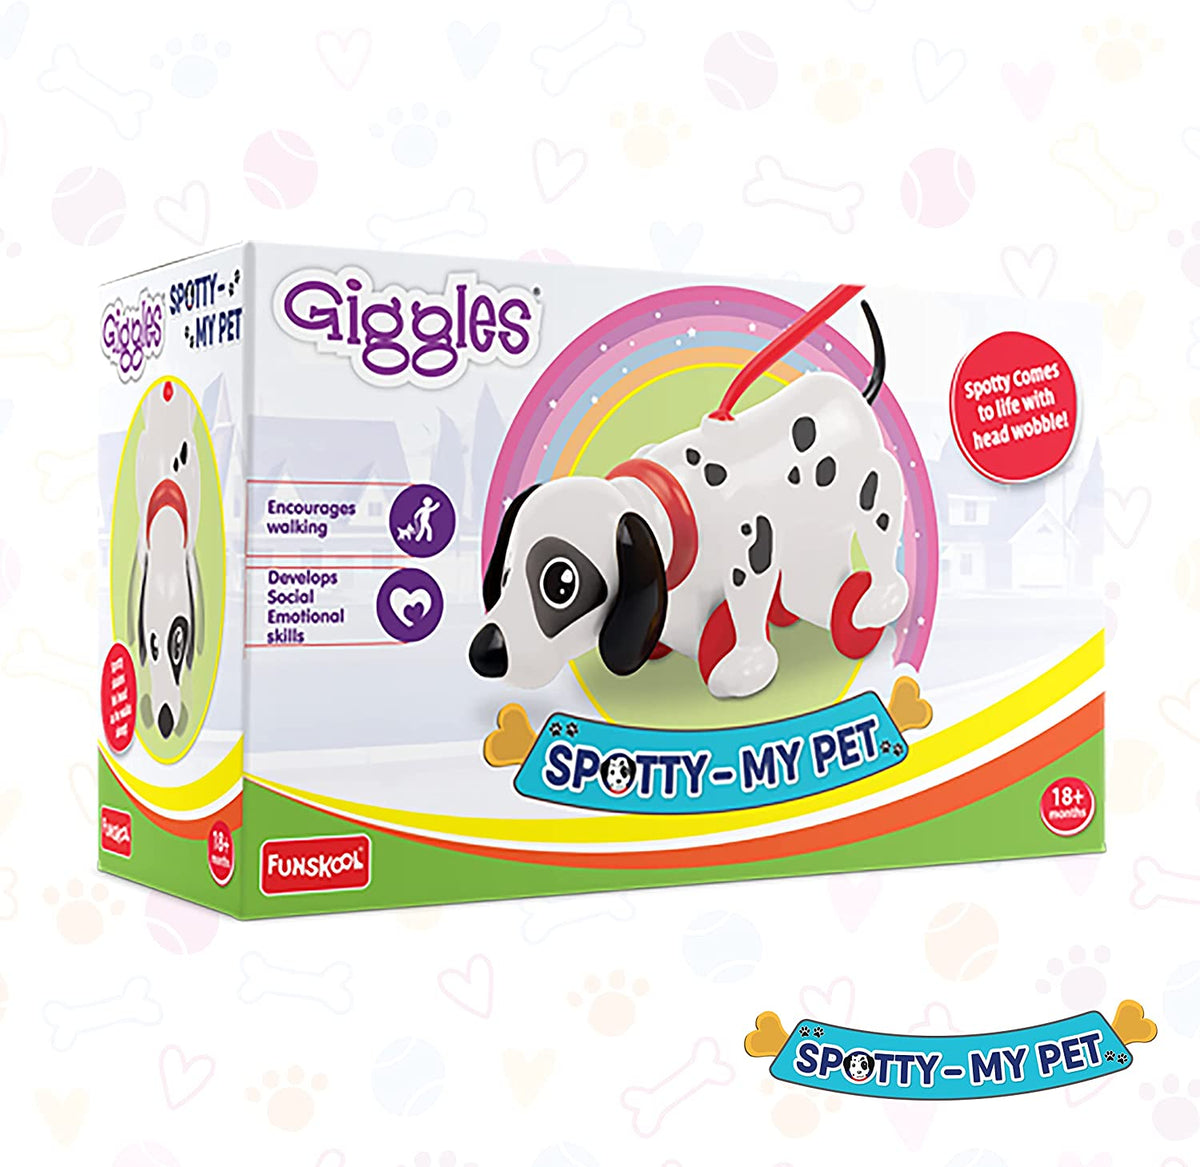 Funskool Giggles Spotty My Pet Pull Along Toy for Kids Ages 18 Months & Above